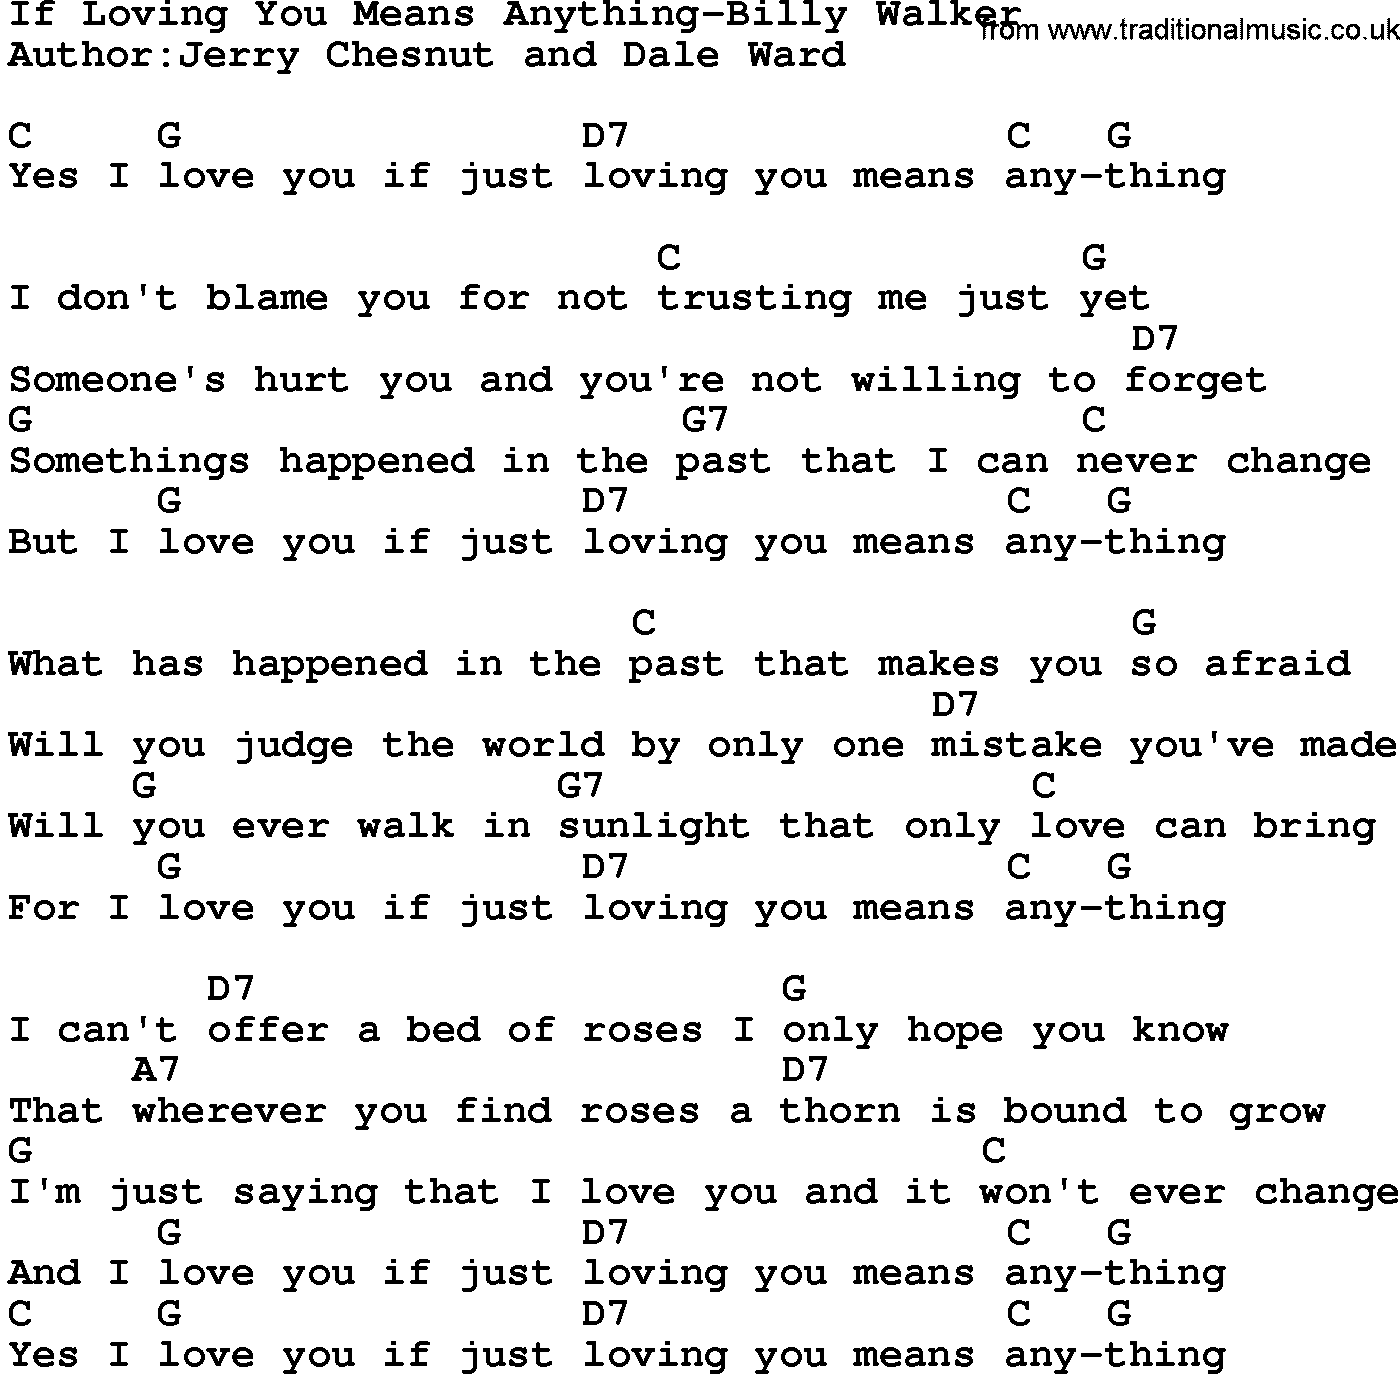 Country music song: If Loving You Means Anything-Billy Walker lyrics and chords